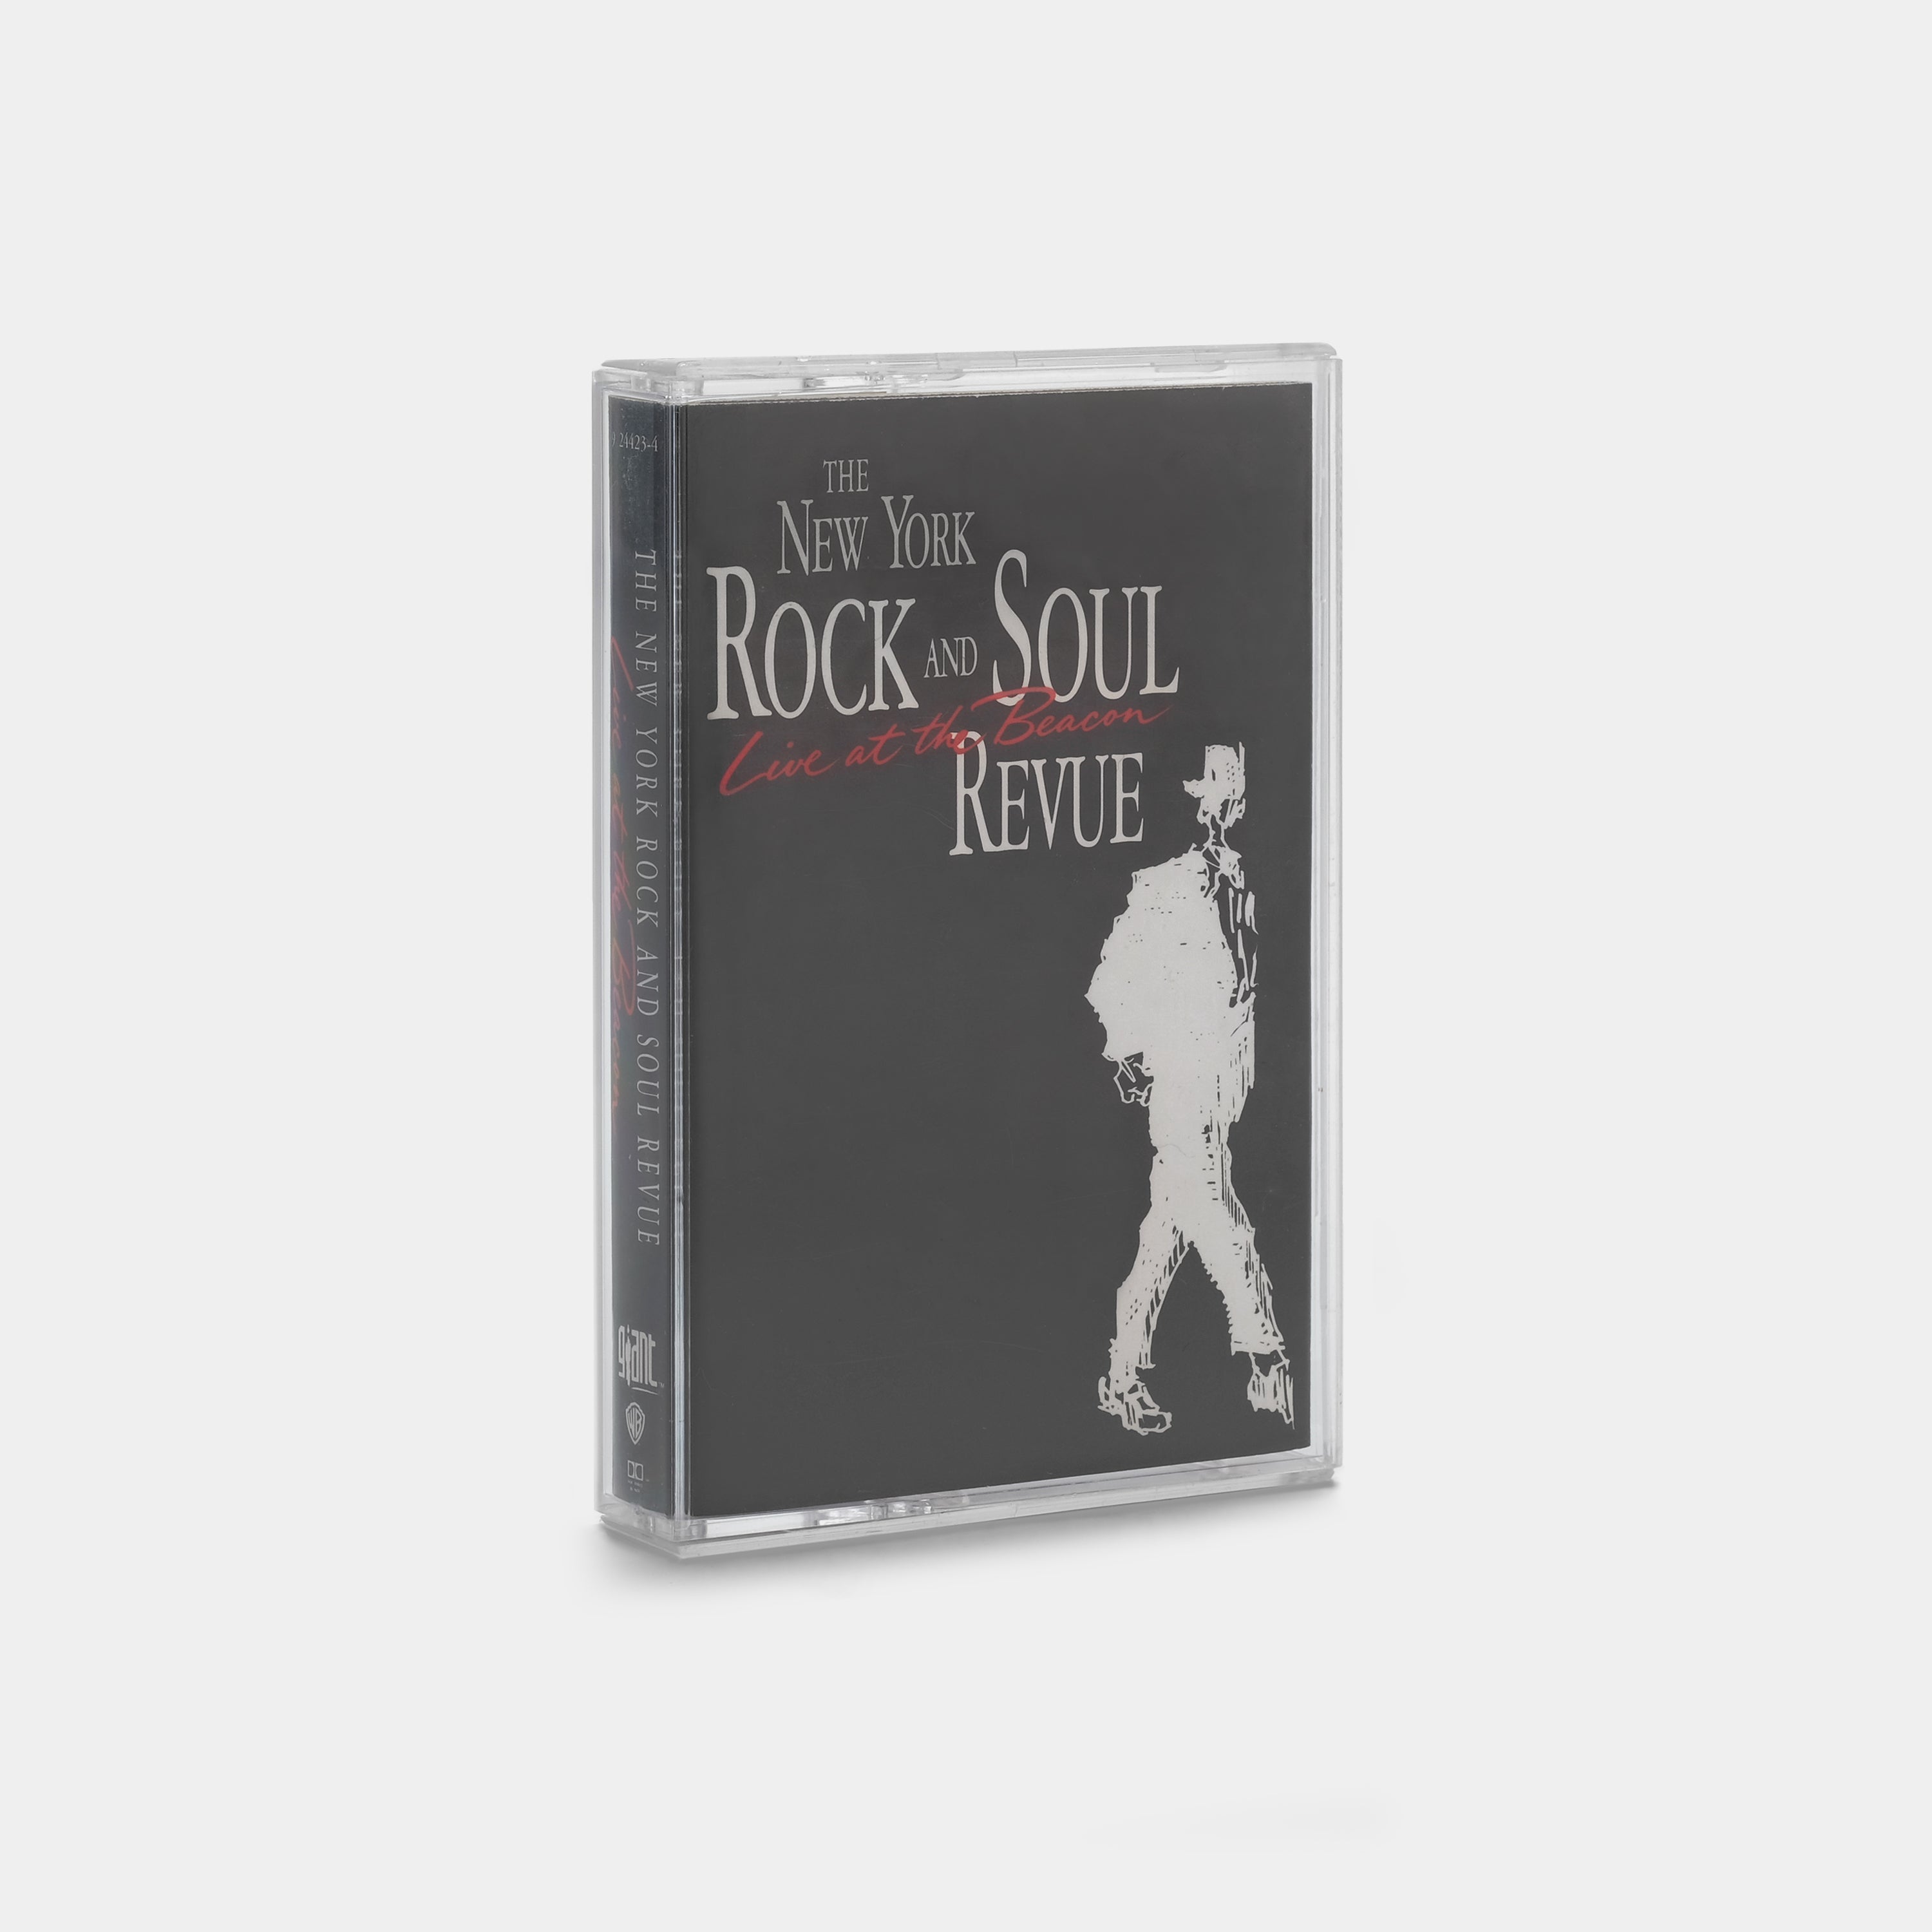 The New York Rock And Soul Revue - Live At The Beacon Cassette Tape